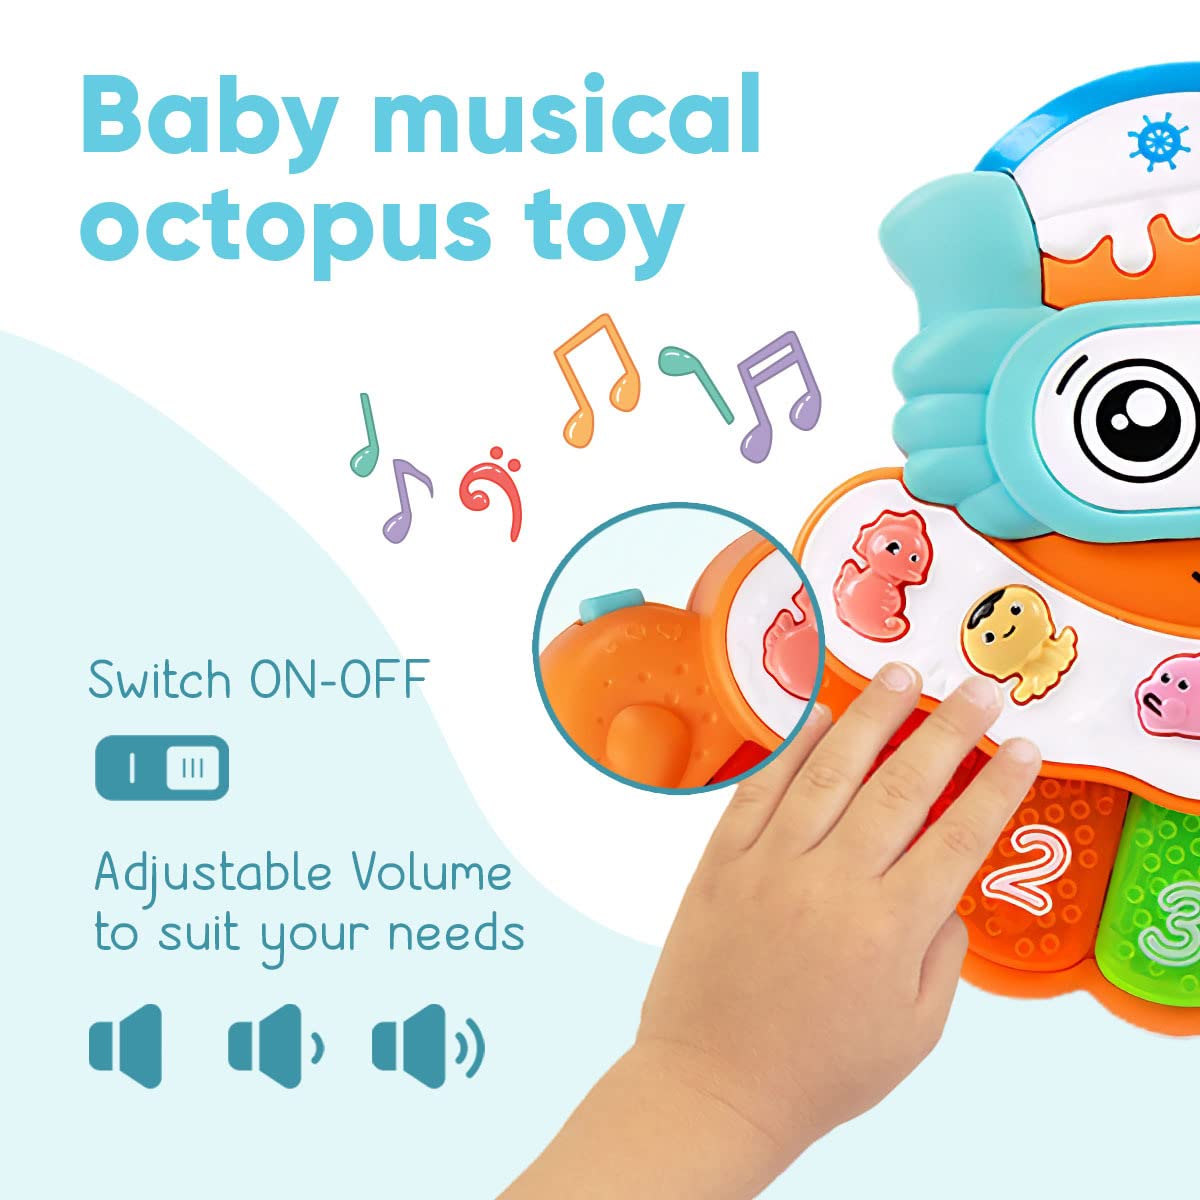 Musical Toy for Babies, Octopus Piano Plays Music, Numbers, and Sounds, Light Up Keyboard and Ocean Theme Animal Buttons, Electronic Learning Game for Infants and Toddlers, Built in Handle